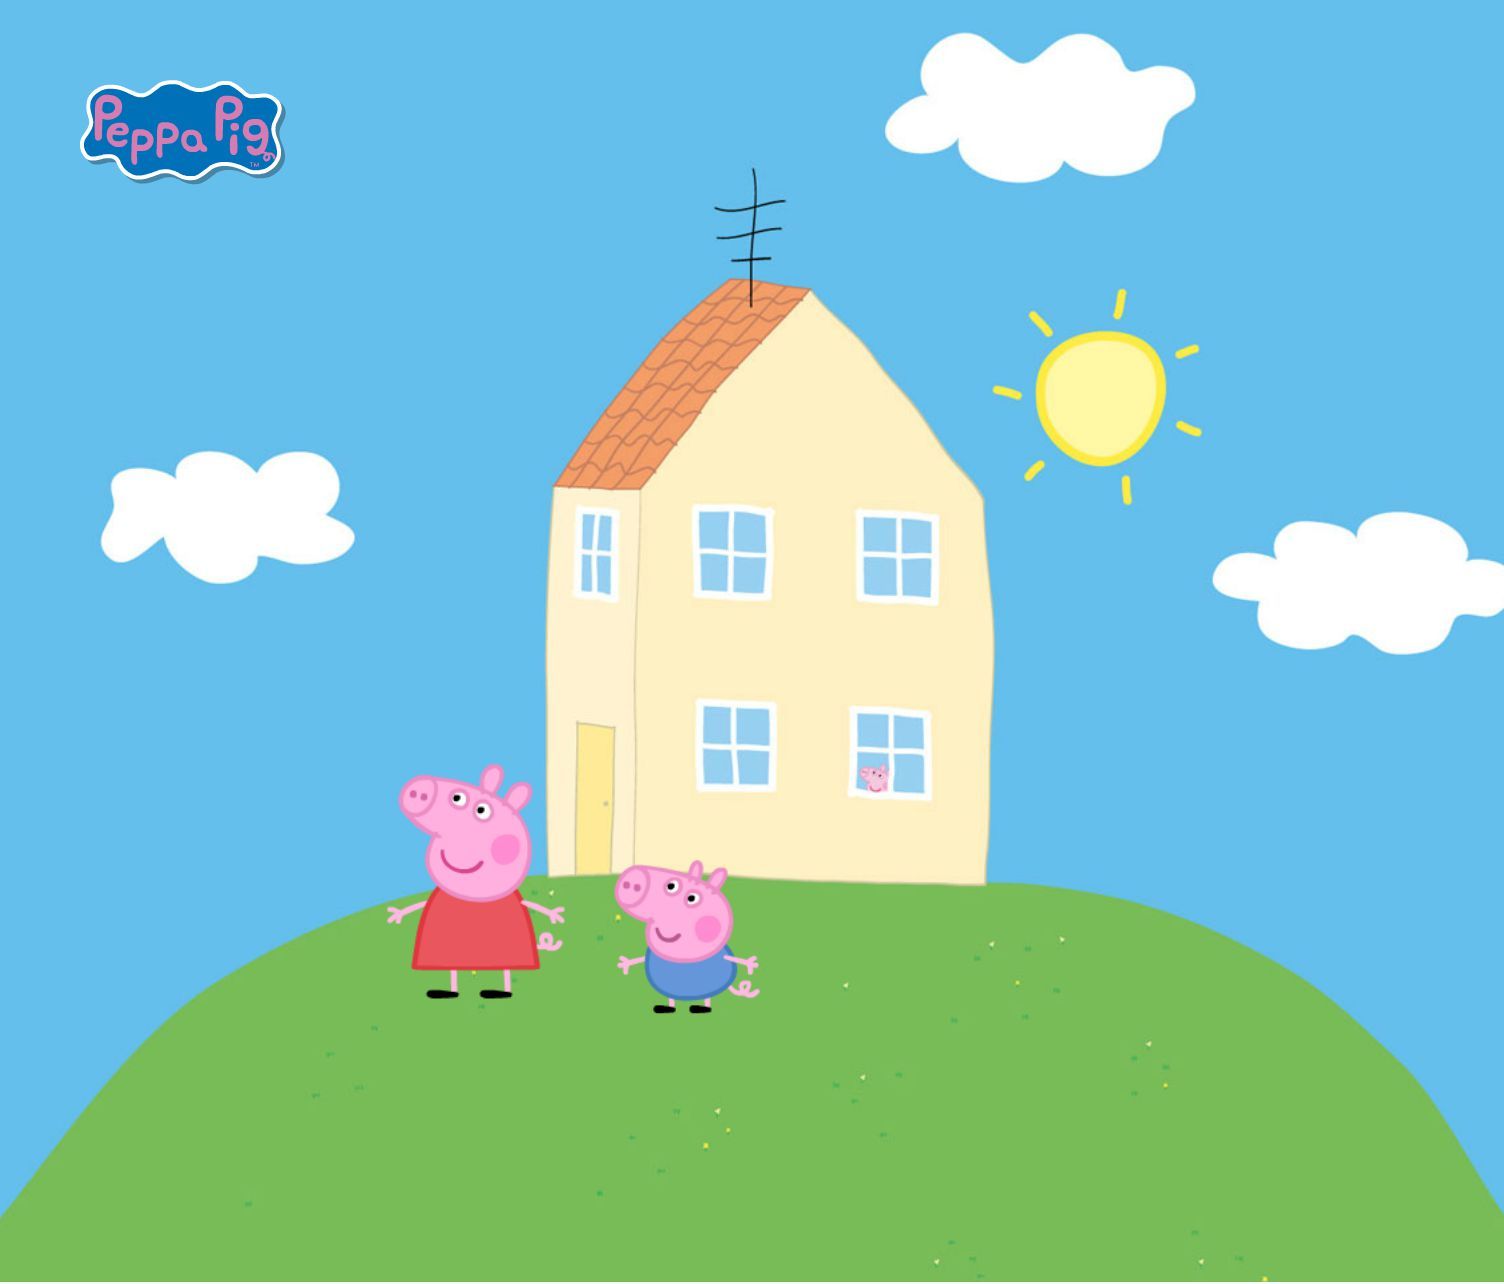 Pin by Alejandra Cobos Susrez on Peps pig party Peppa pig house 1504x1284